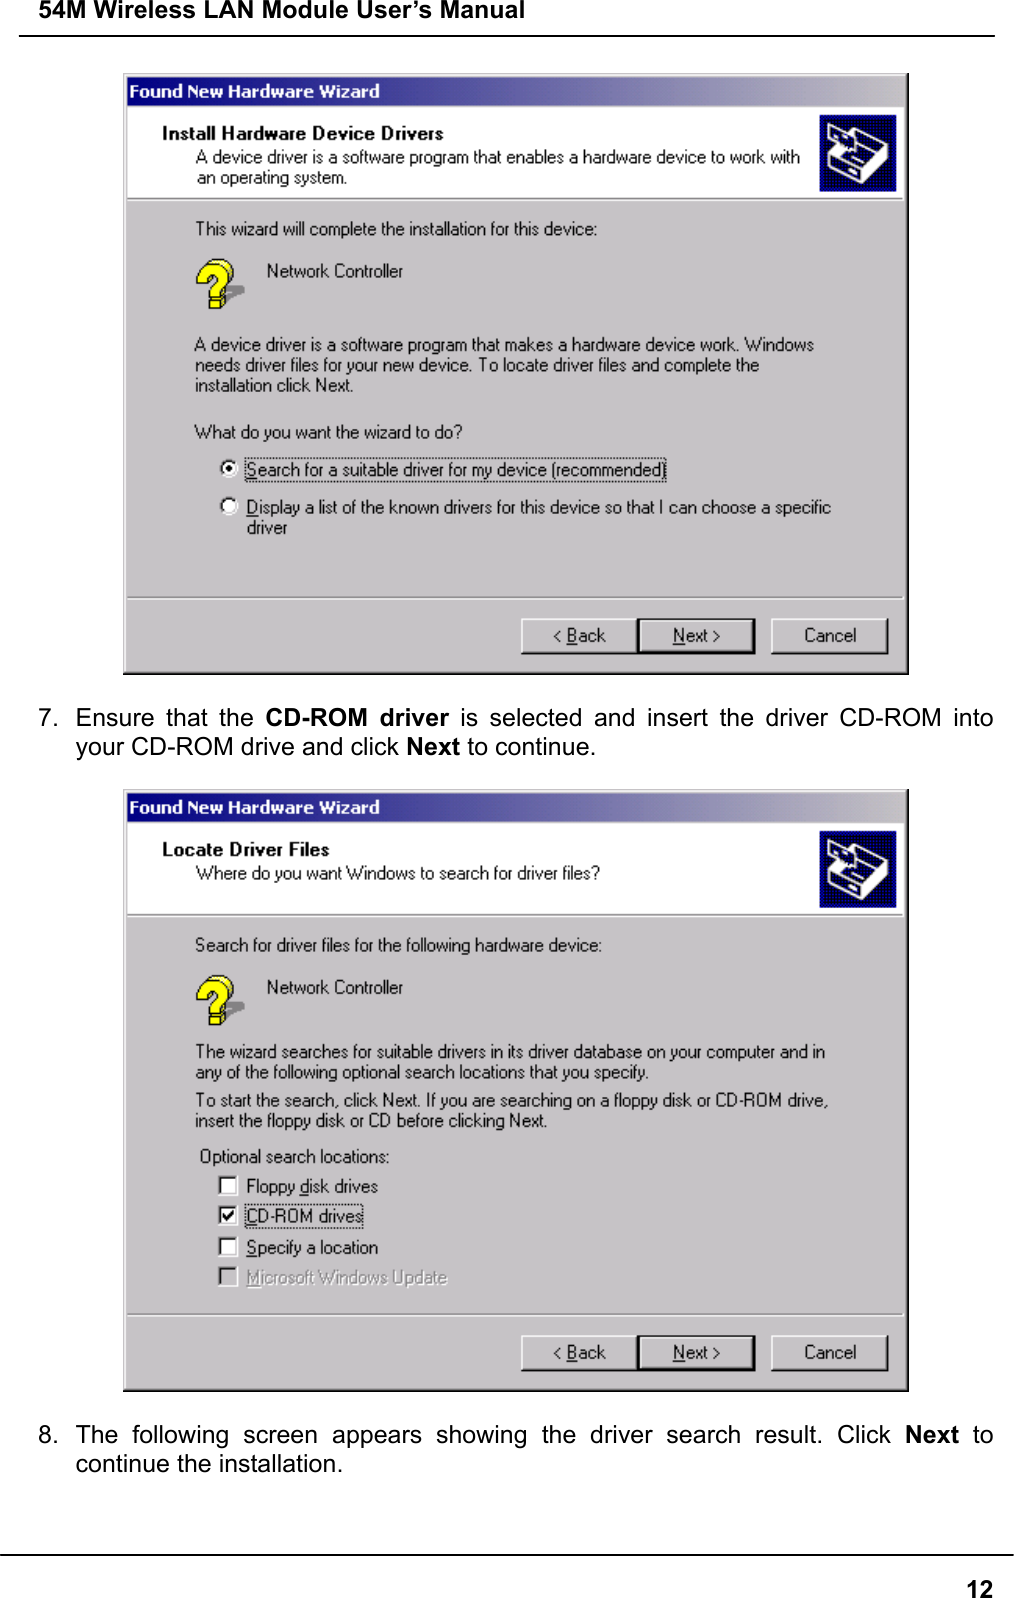 54M Wireless LAN Module User’s Manual  12  7.  Ensure that the CD-ROM driver is selected and insert the driver CD-ROM into your CD-ROM drive and click Next to continue.    8. The following screen appears showing the driver search result. Click Next  to continue the installation.  